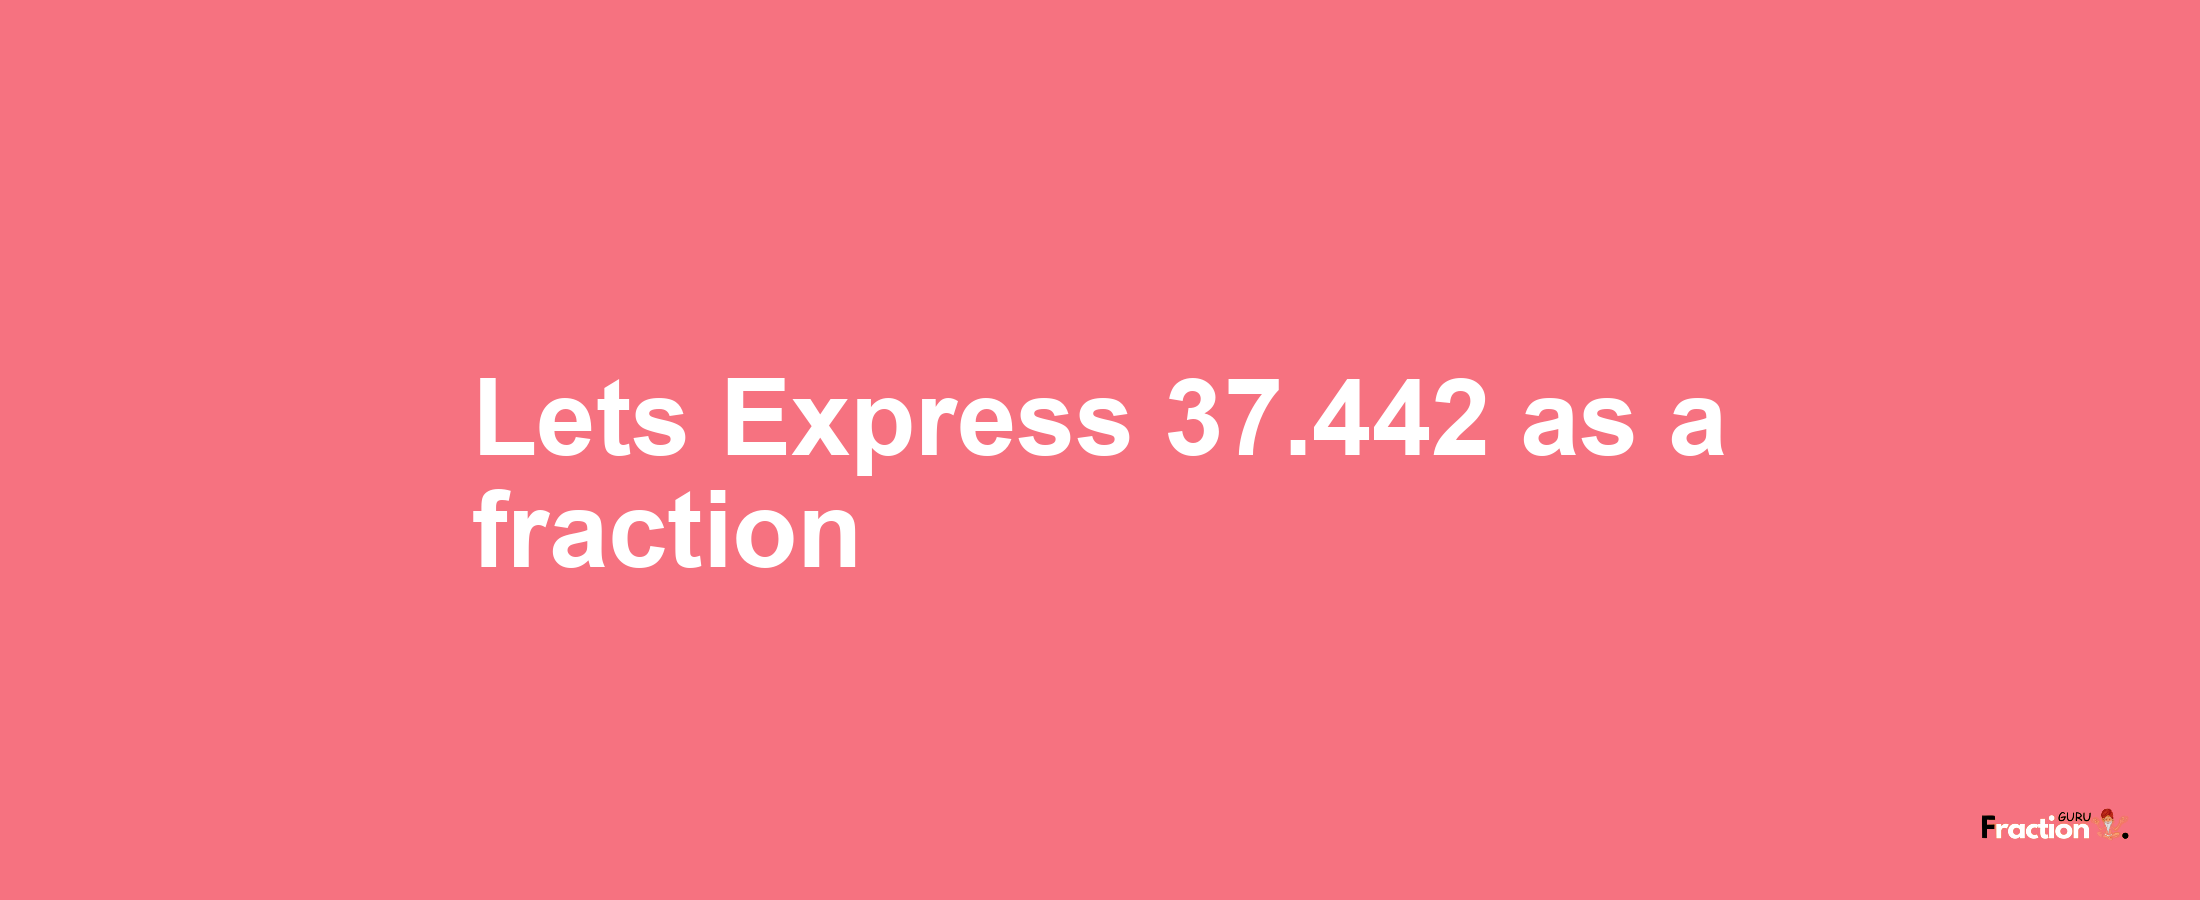 Lets Express 37.442 as afraction